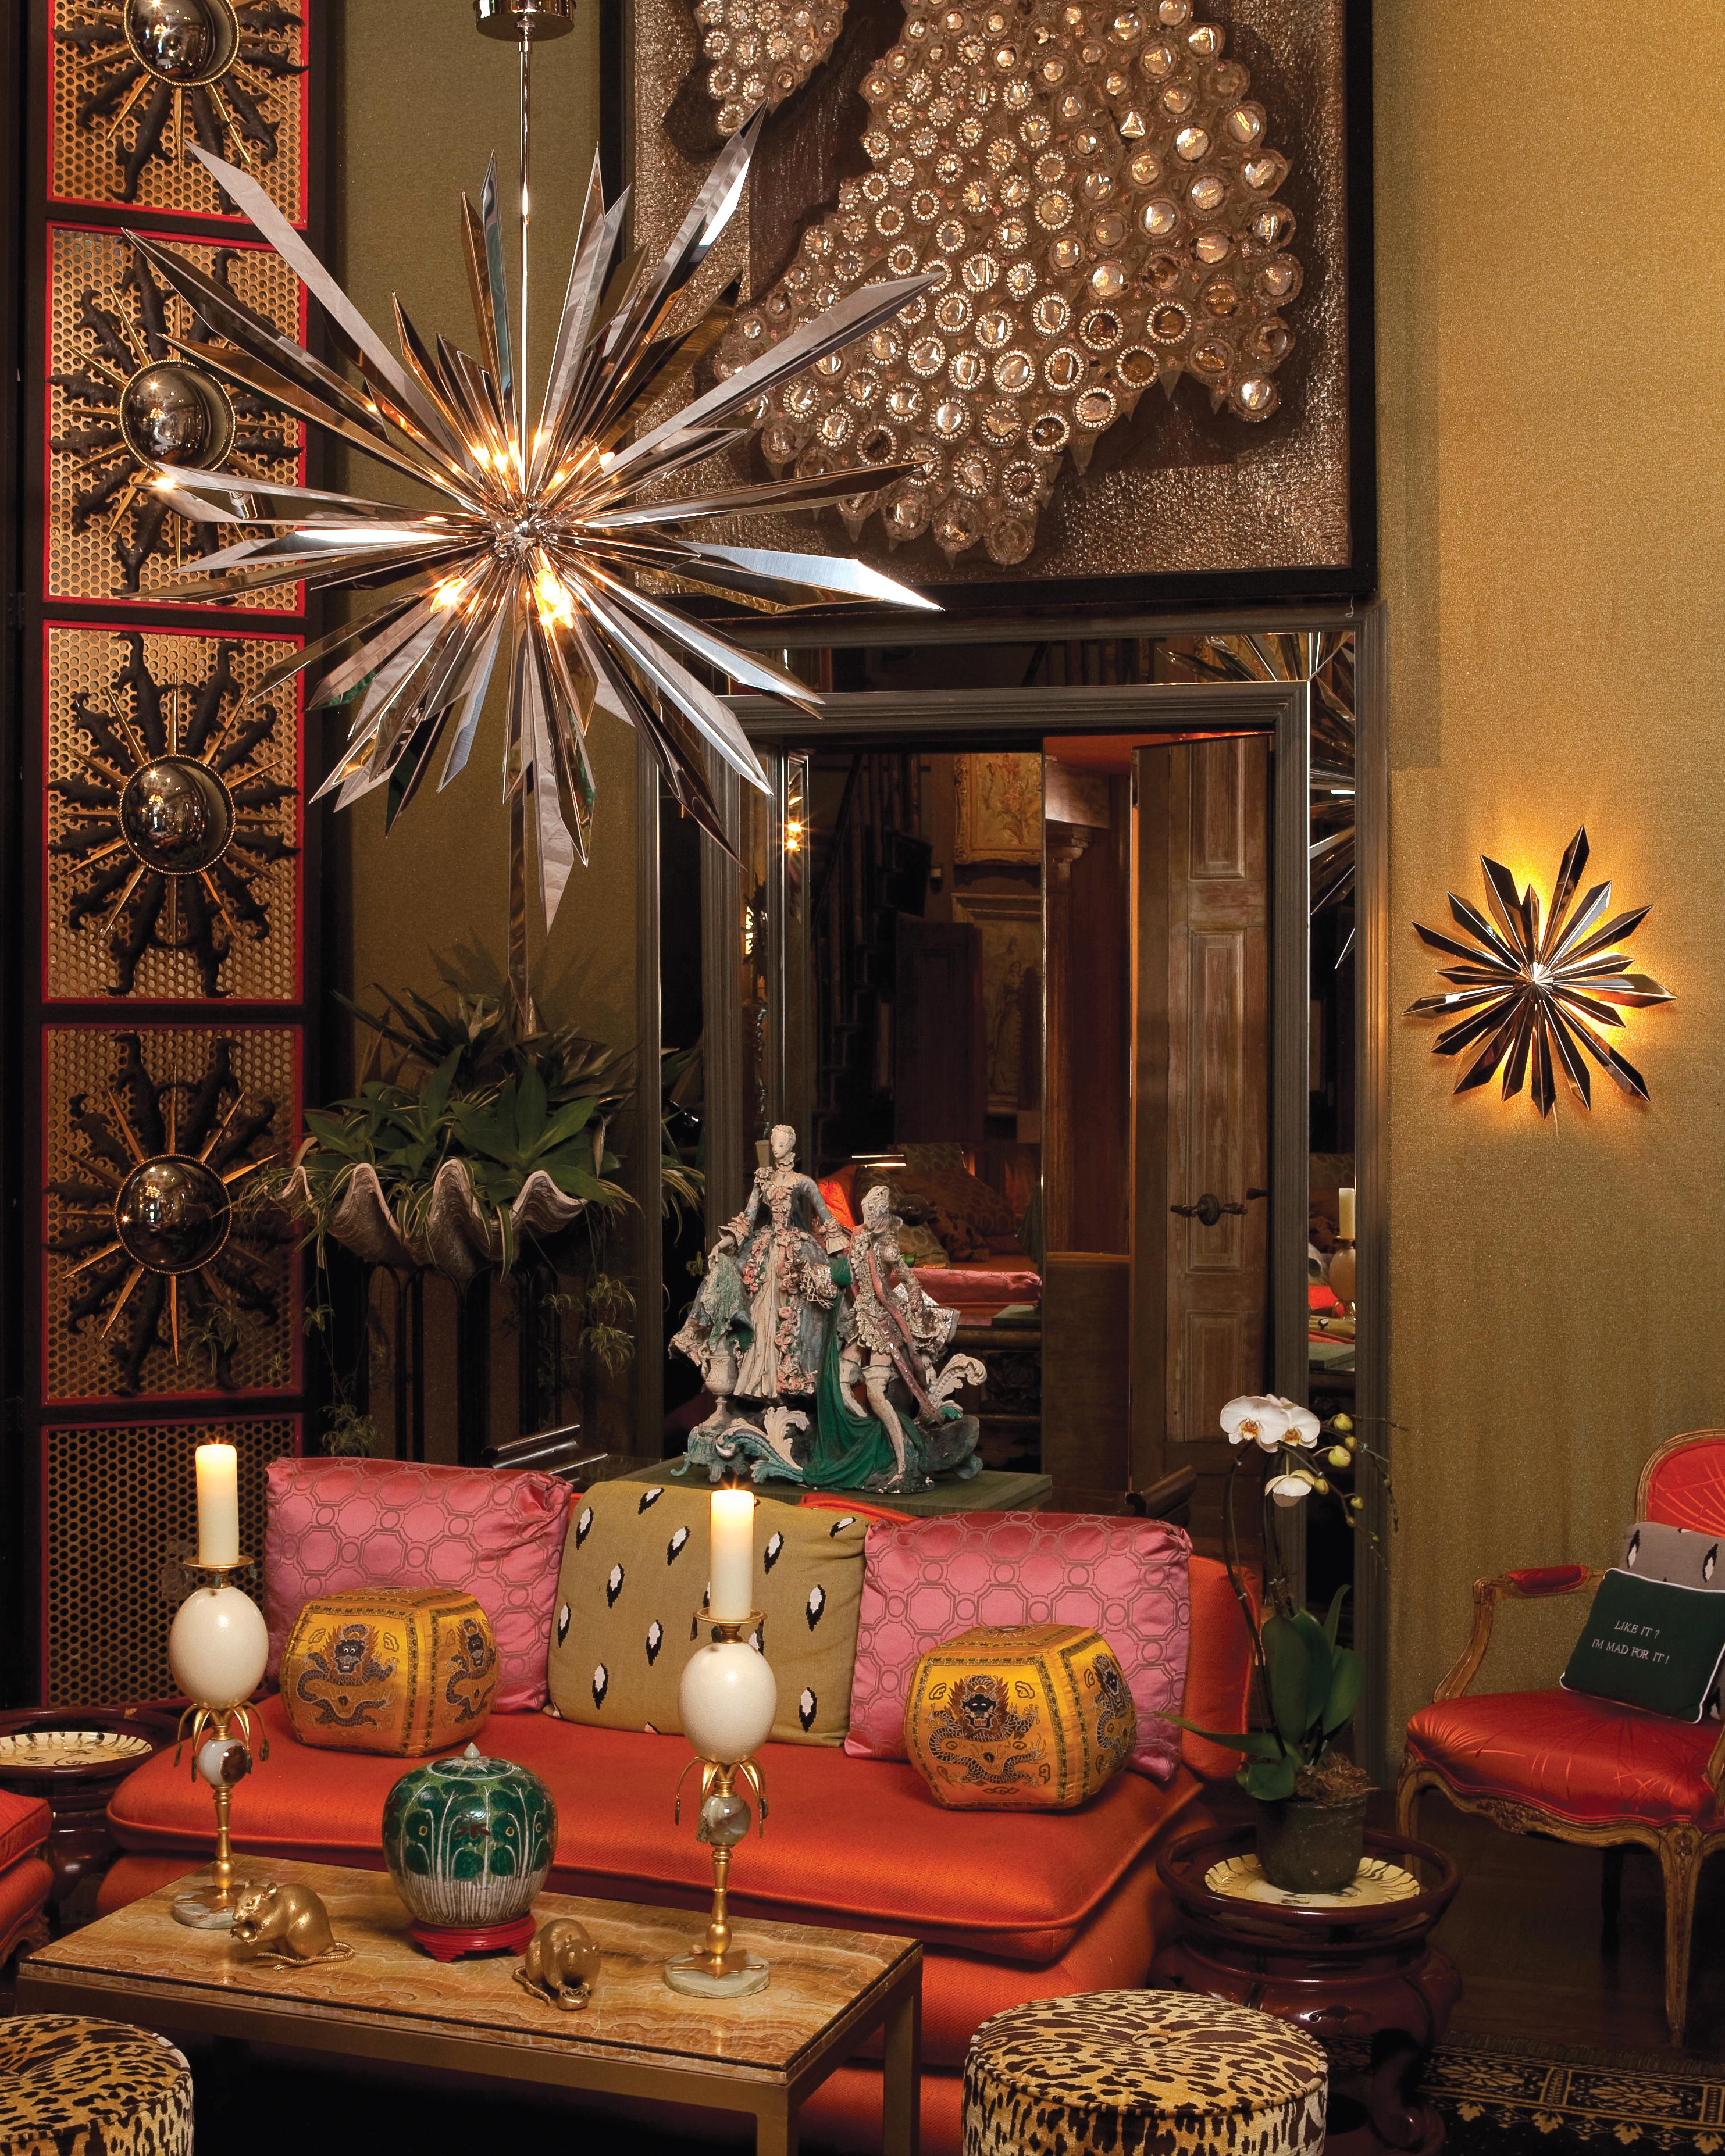 Plated California Sunburst 45 Chandelier designed by Tony Duquette for Remains Lighting